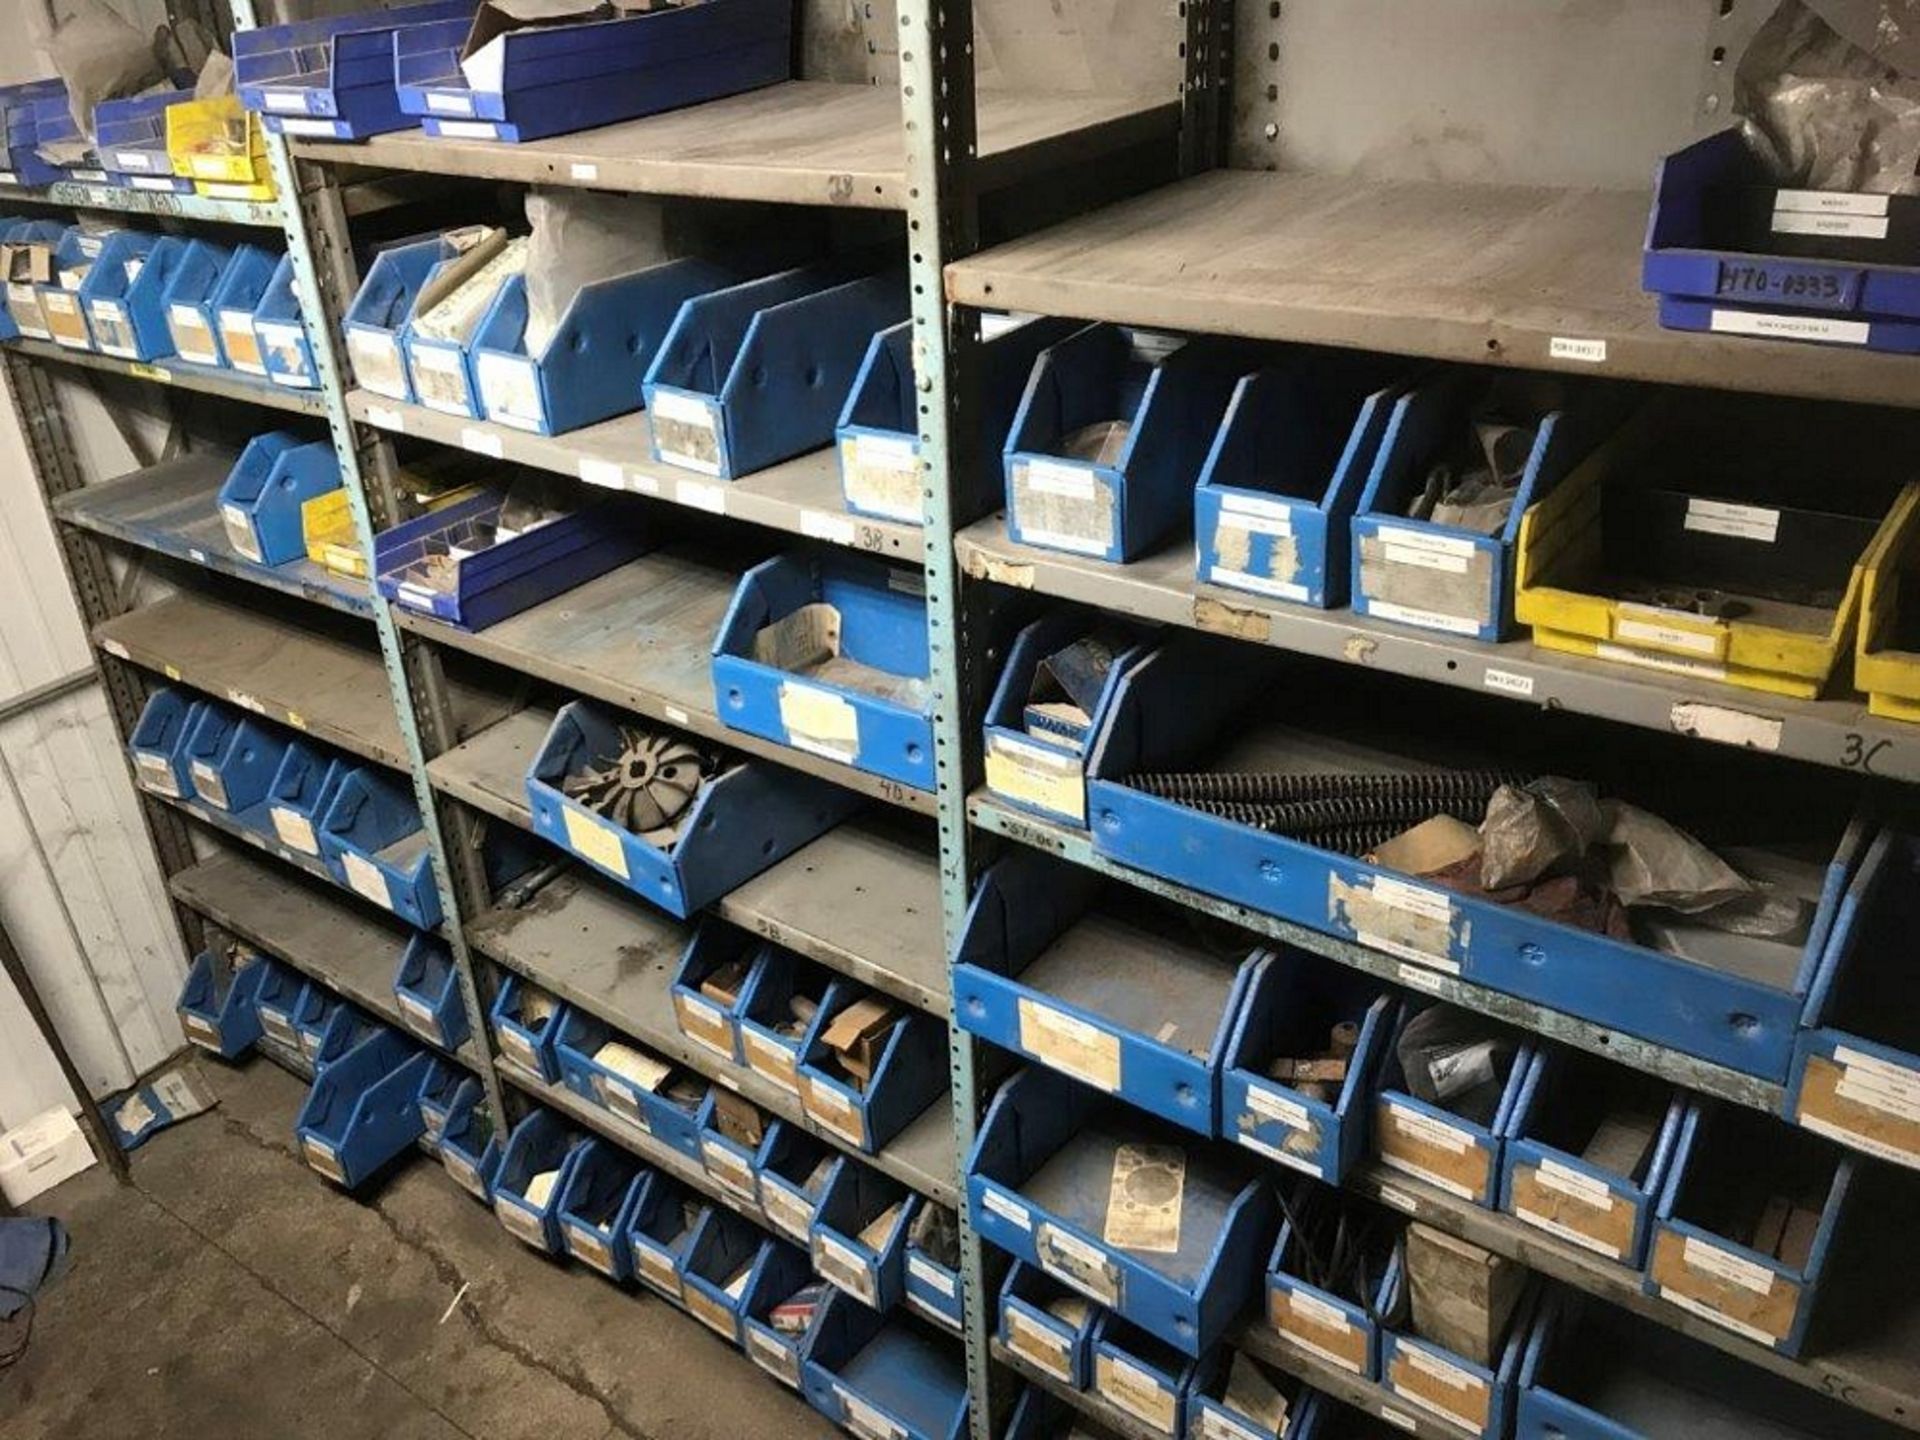 (10) SECTION SHELVING WITH ASSORTED HYDRAULIC VALVE, GEAR WHEELS, BUSHING, SPLIT COLLAR SLEEVE, - Image 6 of 10